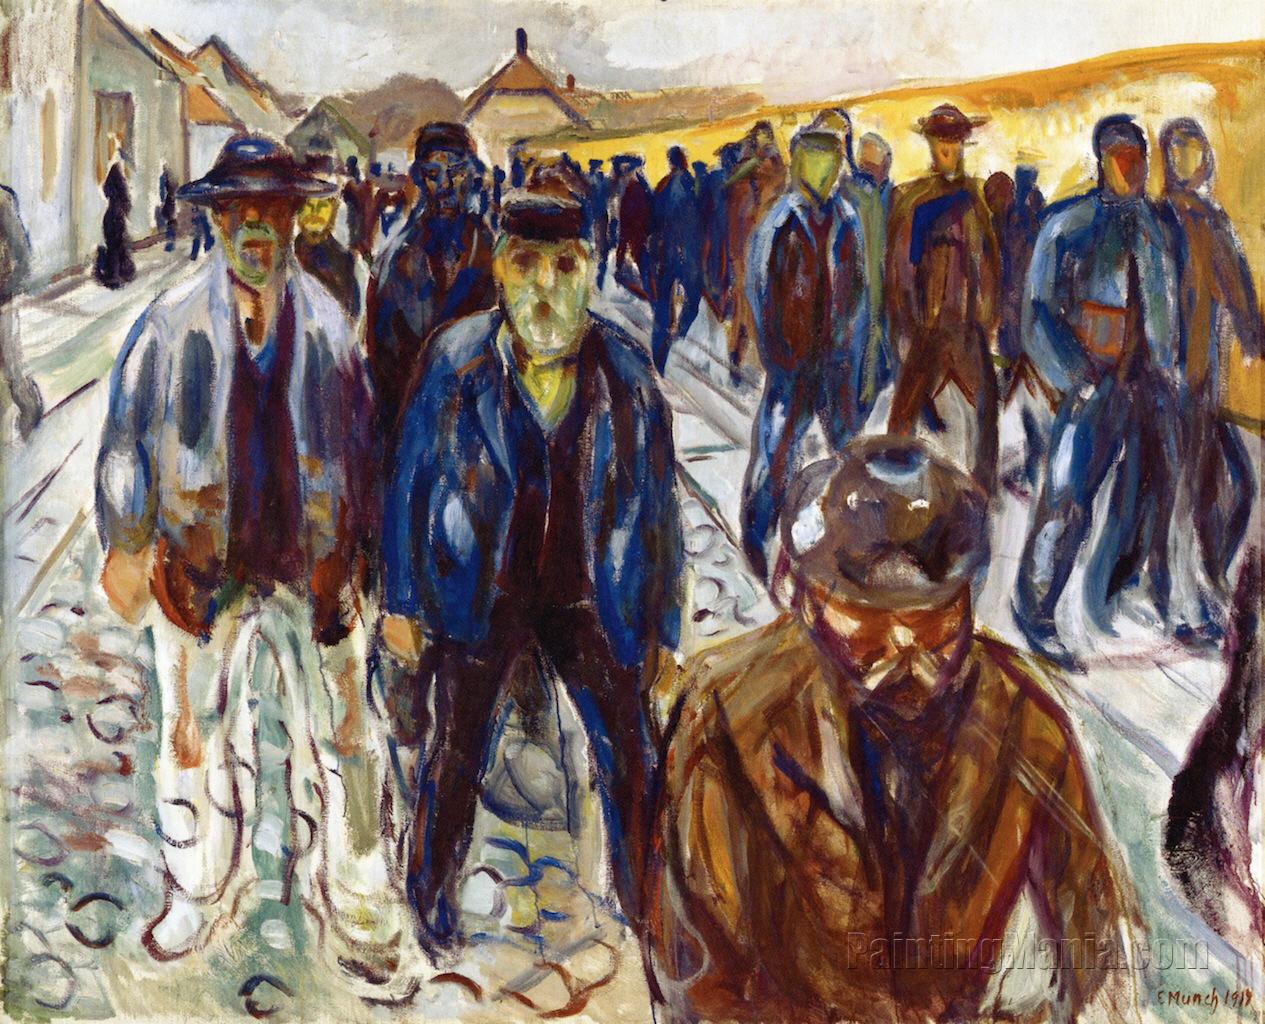 Workers on Their Way Home 1914